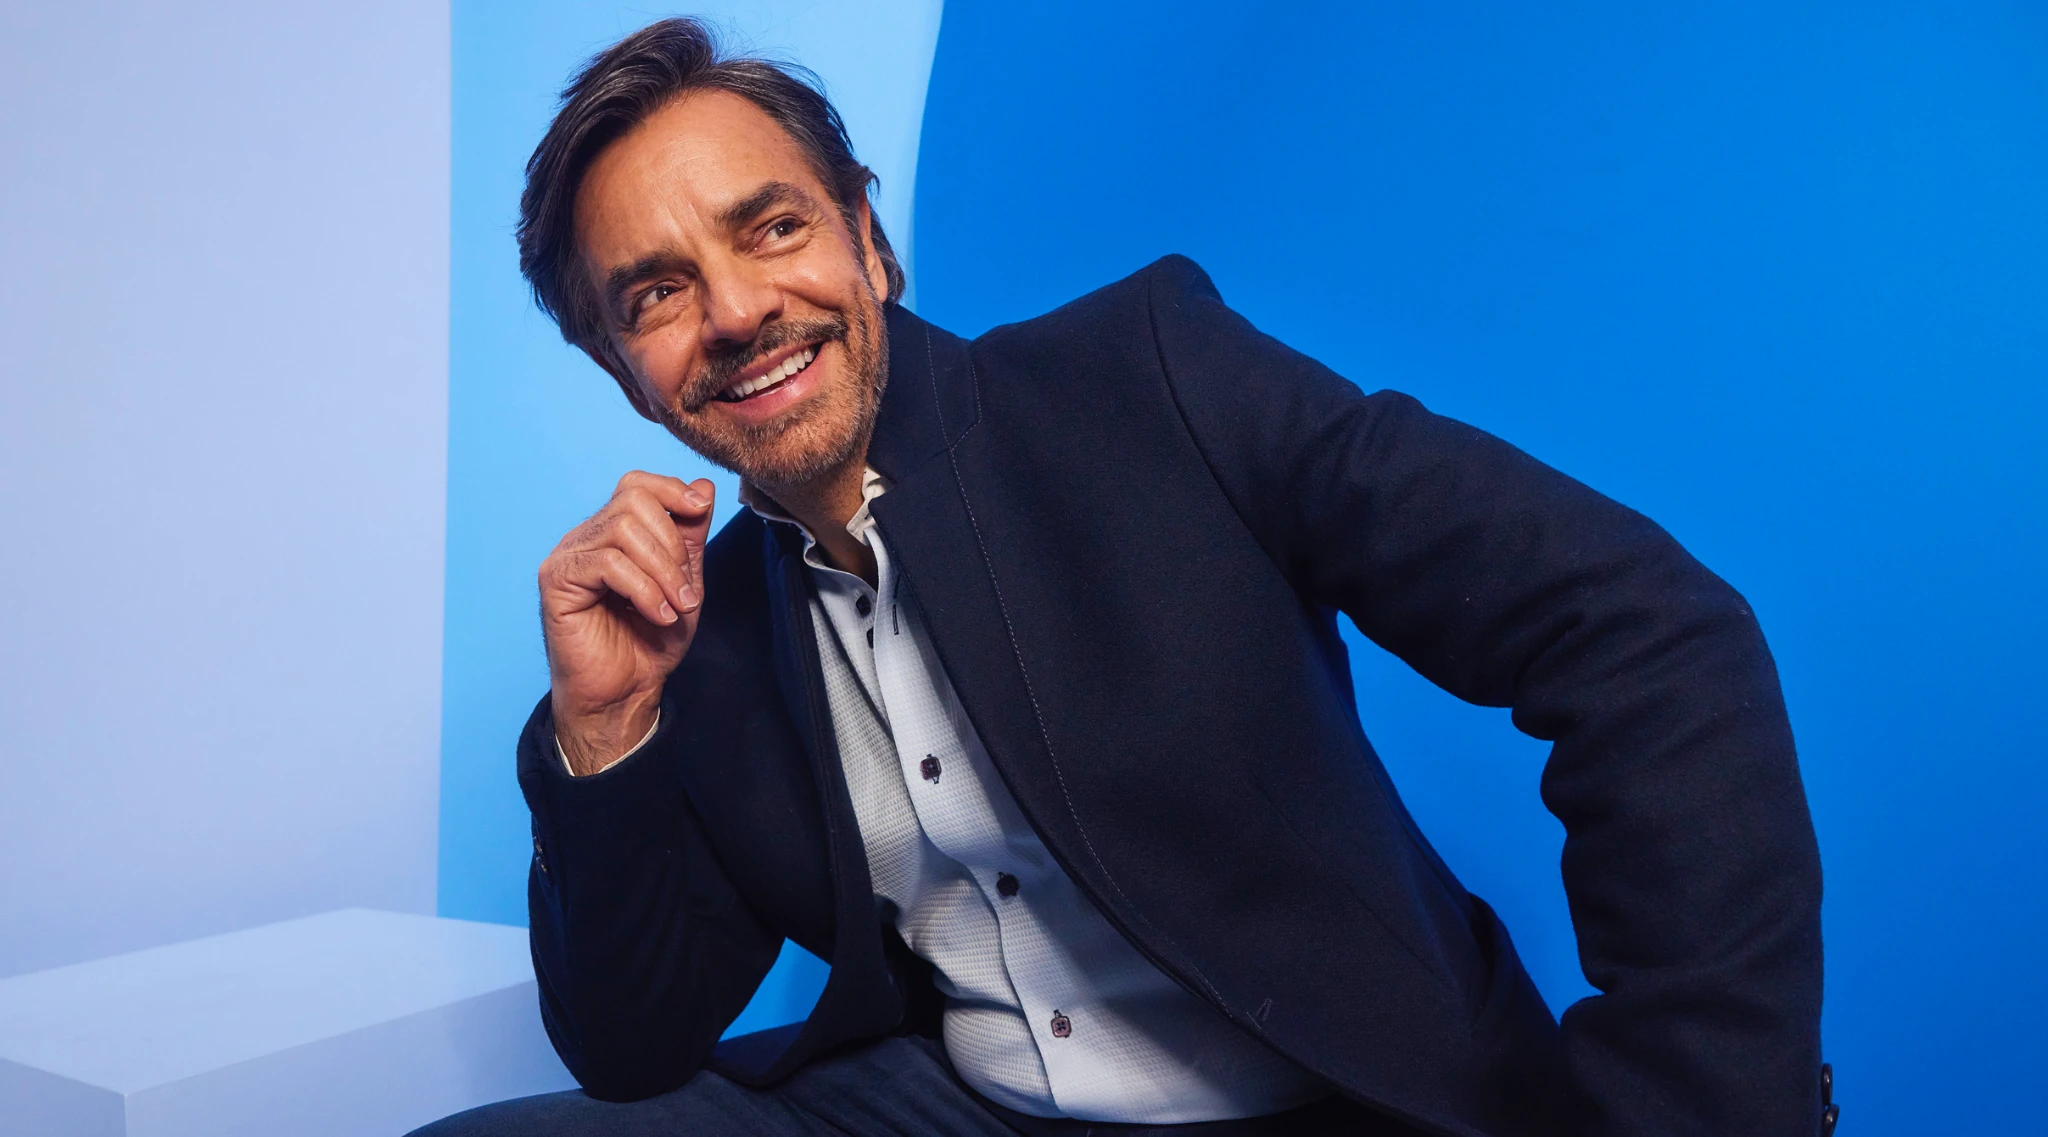 Eugenio Derbez on Finding Connection and 'Crying Constantly' While Making 'Radical' (Exclusive)